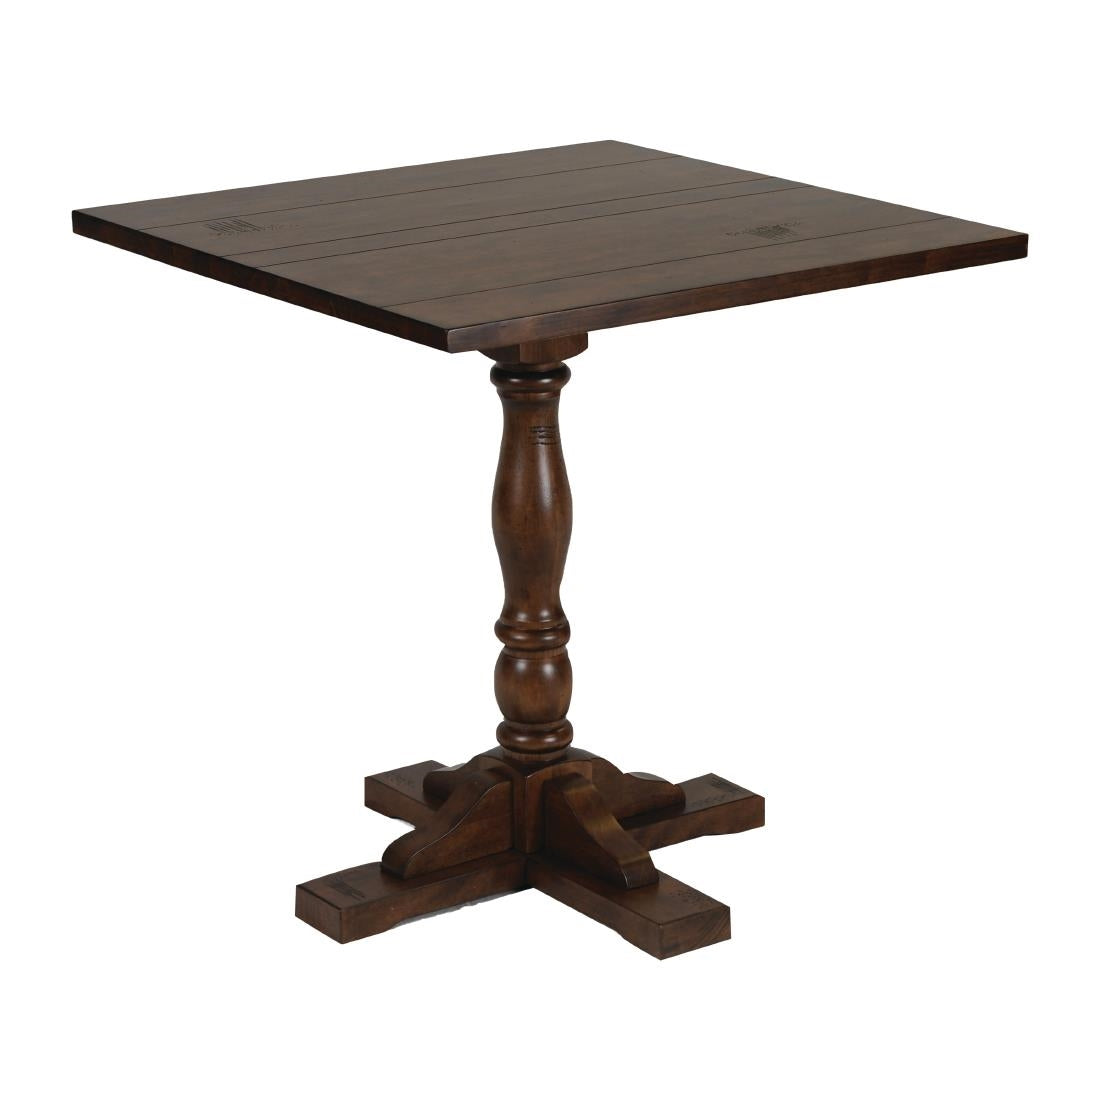 FT510 Oxford Vintage Wood Pedestal Square Table 760x760 JD Catering Equipment Solutions Ltd